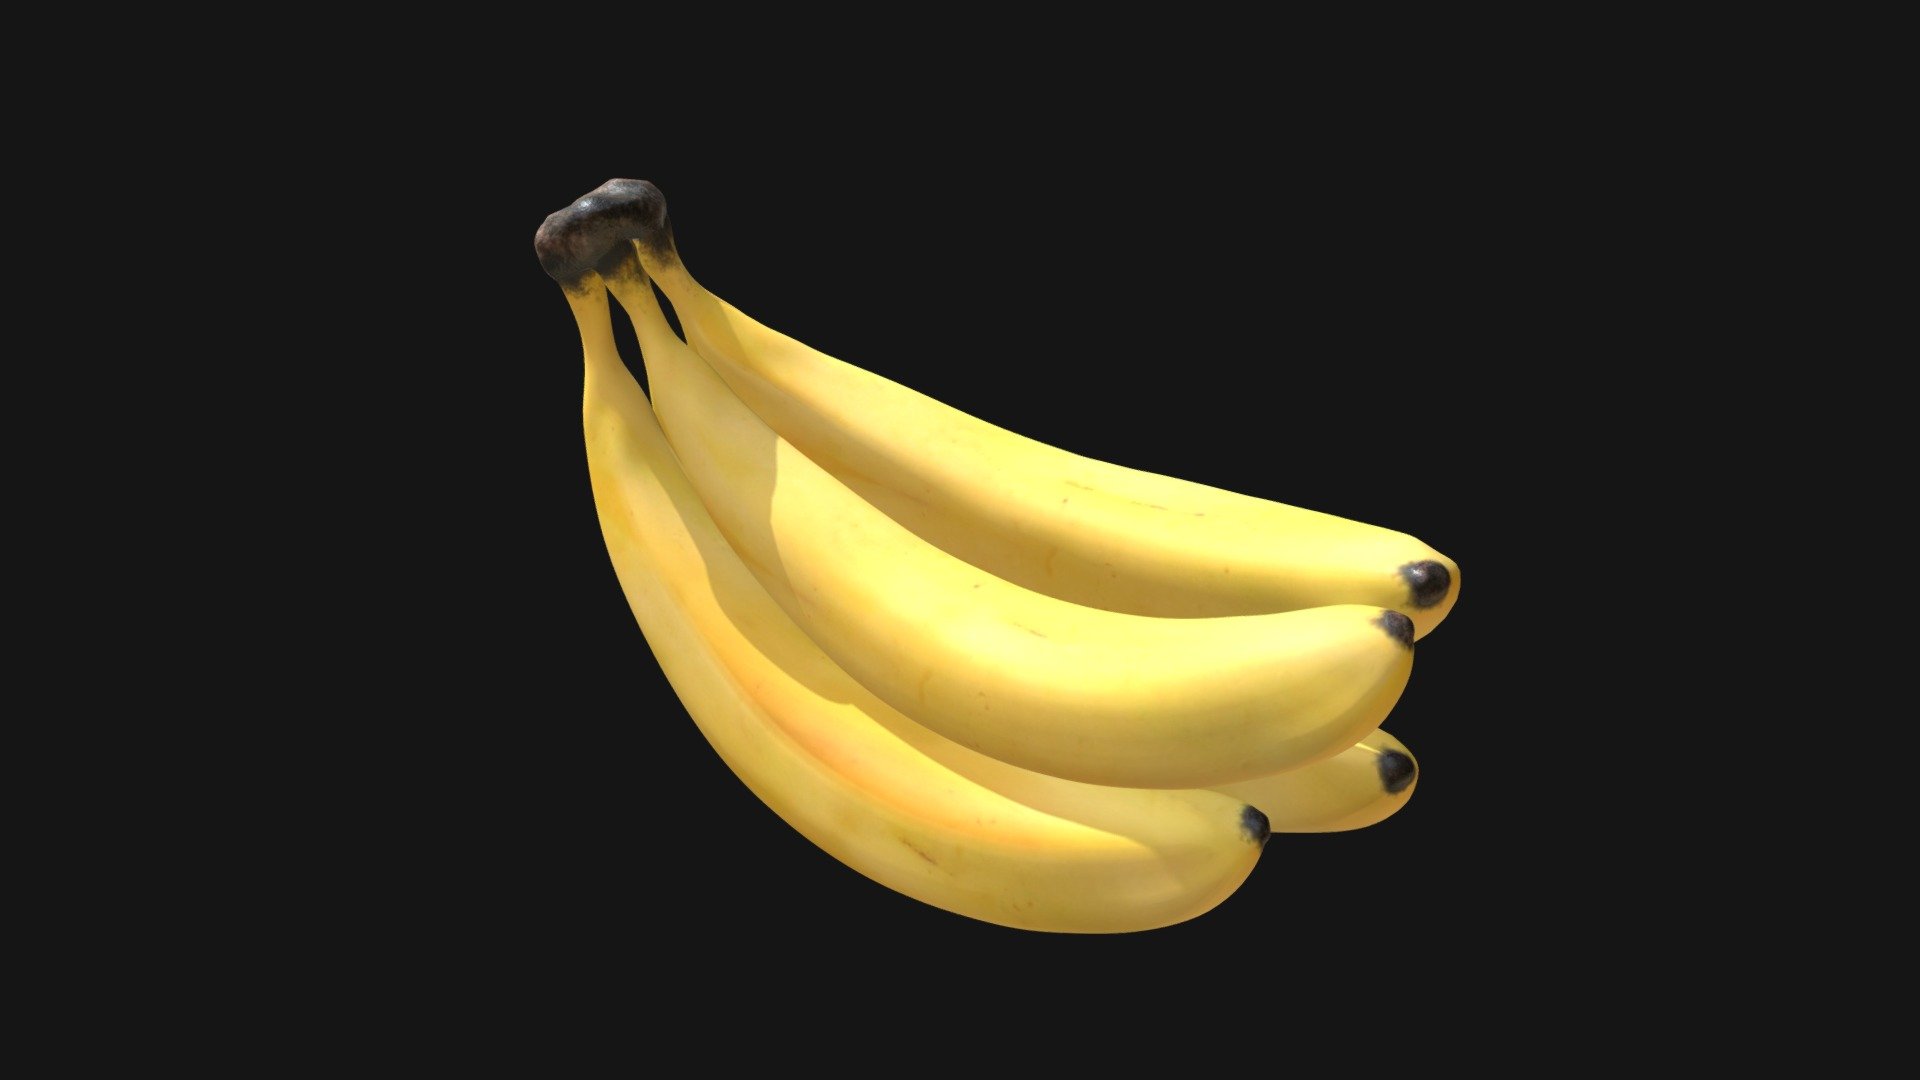 === The following description refers to the additional ZIP package provided with this model ===

Bunch of bananas 3D Model. Production-ready 3D Model, with PBR materials, textures, non overlapping UV Layout map provided in the package.

Quads only geometries (no tris/ngons).

Formats included: FBX, OBJ; scenes: BLEND (with Cycles / Eevee PBR Materials and Textures); other: 16-bit PNGs with Alpha.

1 Object (mesh), 1 PBR Material, UV unwrapped (non overlapping UV Layout map provided in the package); UV-mapped Textures.

UV Layout maps and Image Textures resolutions: 2048x2048; PBR Textures made with Substance Painter.

Polygonal, QUADS ONLY (no tris/ngons); 23428 vertices, 23426 quad faces (46852 tris).

Real world dimensions; scene scale units: cm in Blender 3.3 (that is: Metric with 0.01 scale).

Uniform scale object (scale applied in Blender 3.3) 3d model